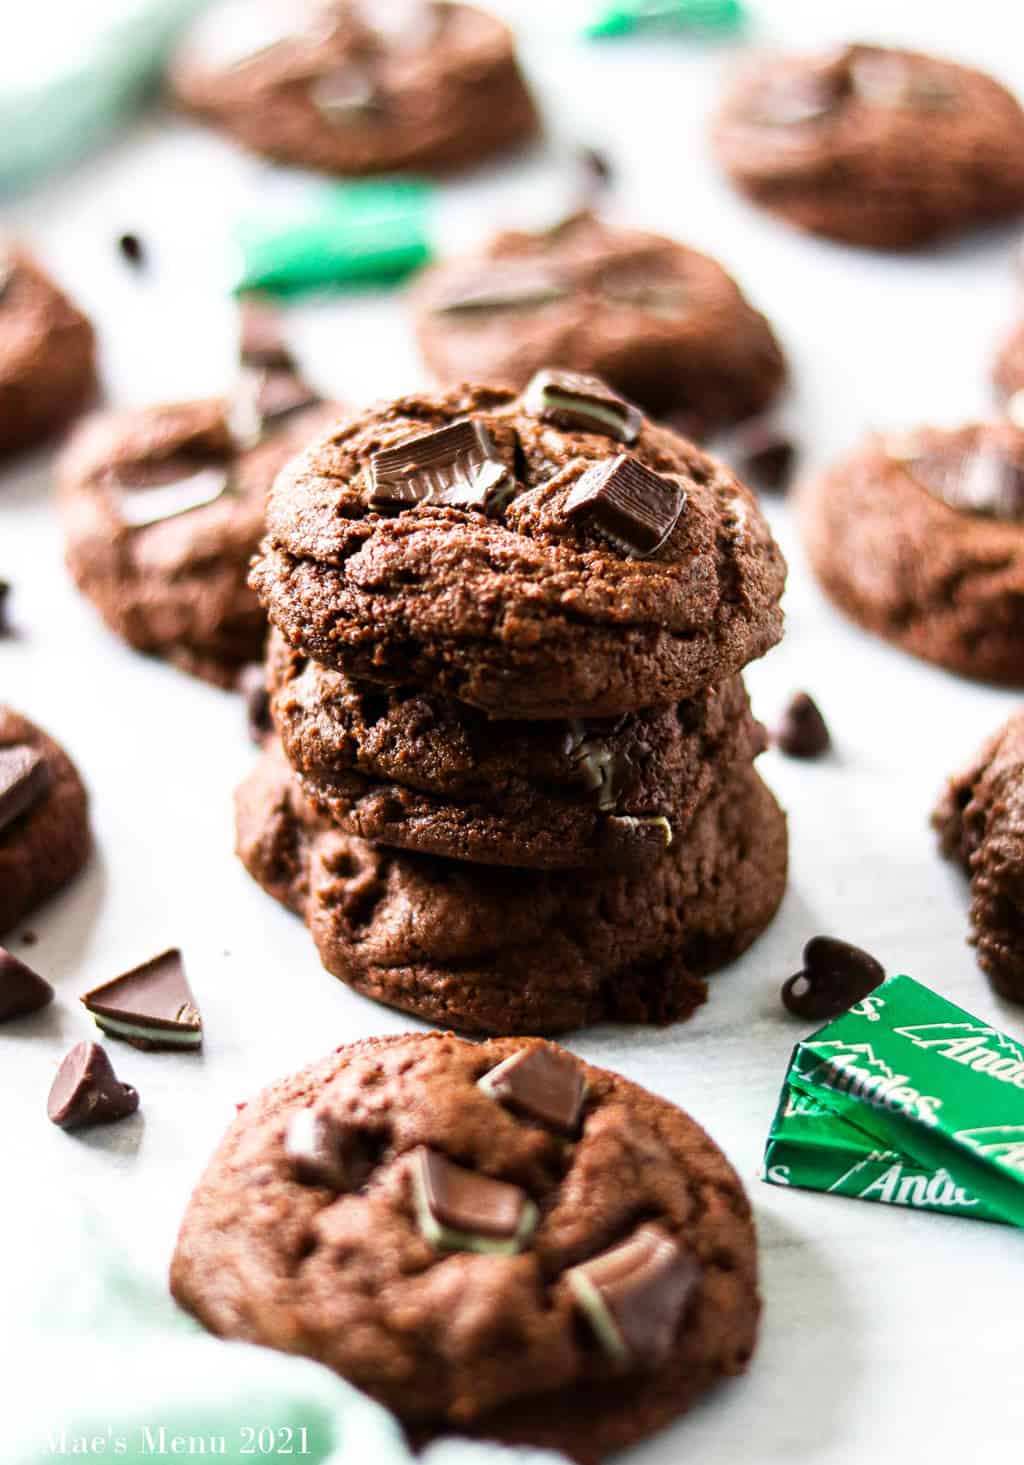 A stack of mint chocolate chip cookies with chocoalte chips, mints, and a green towel